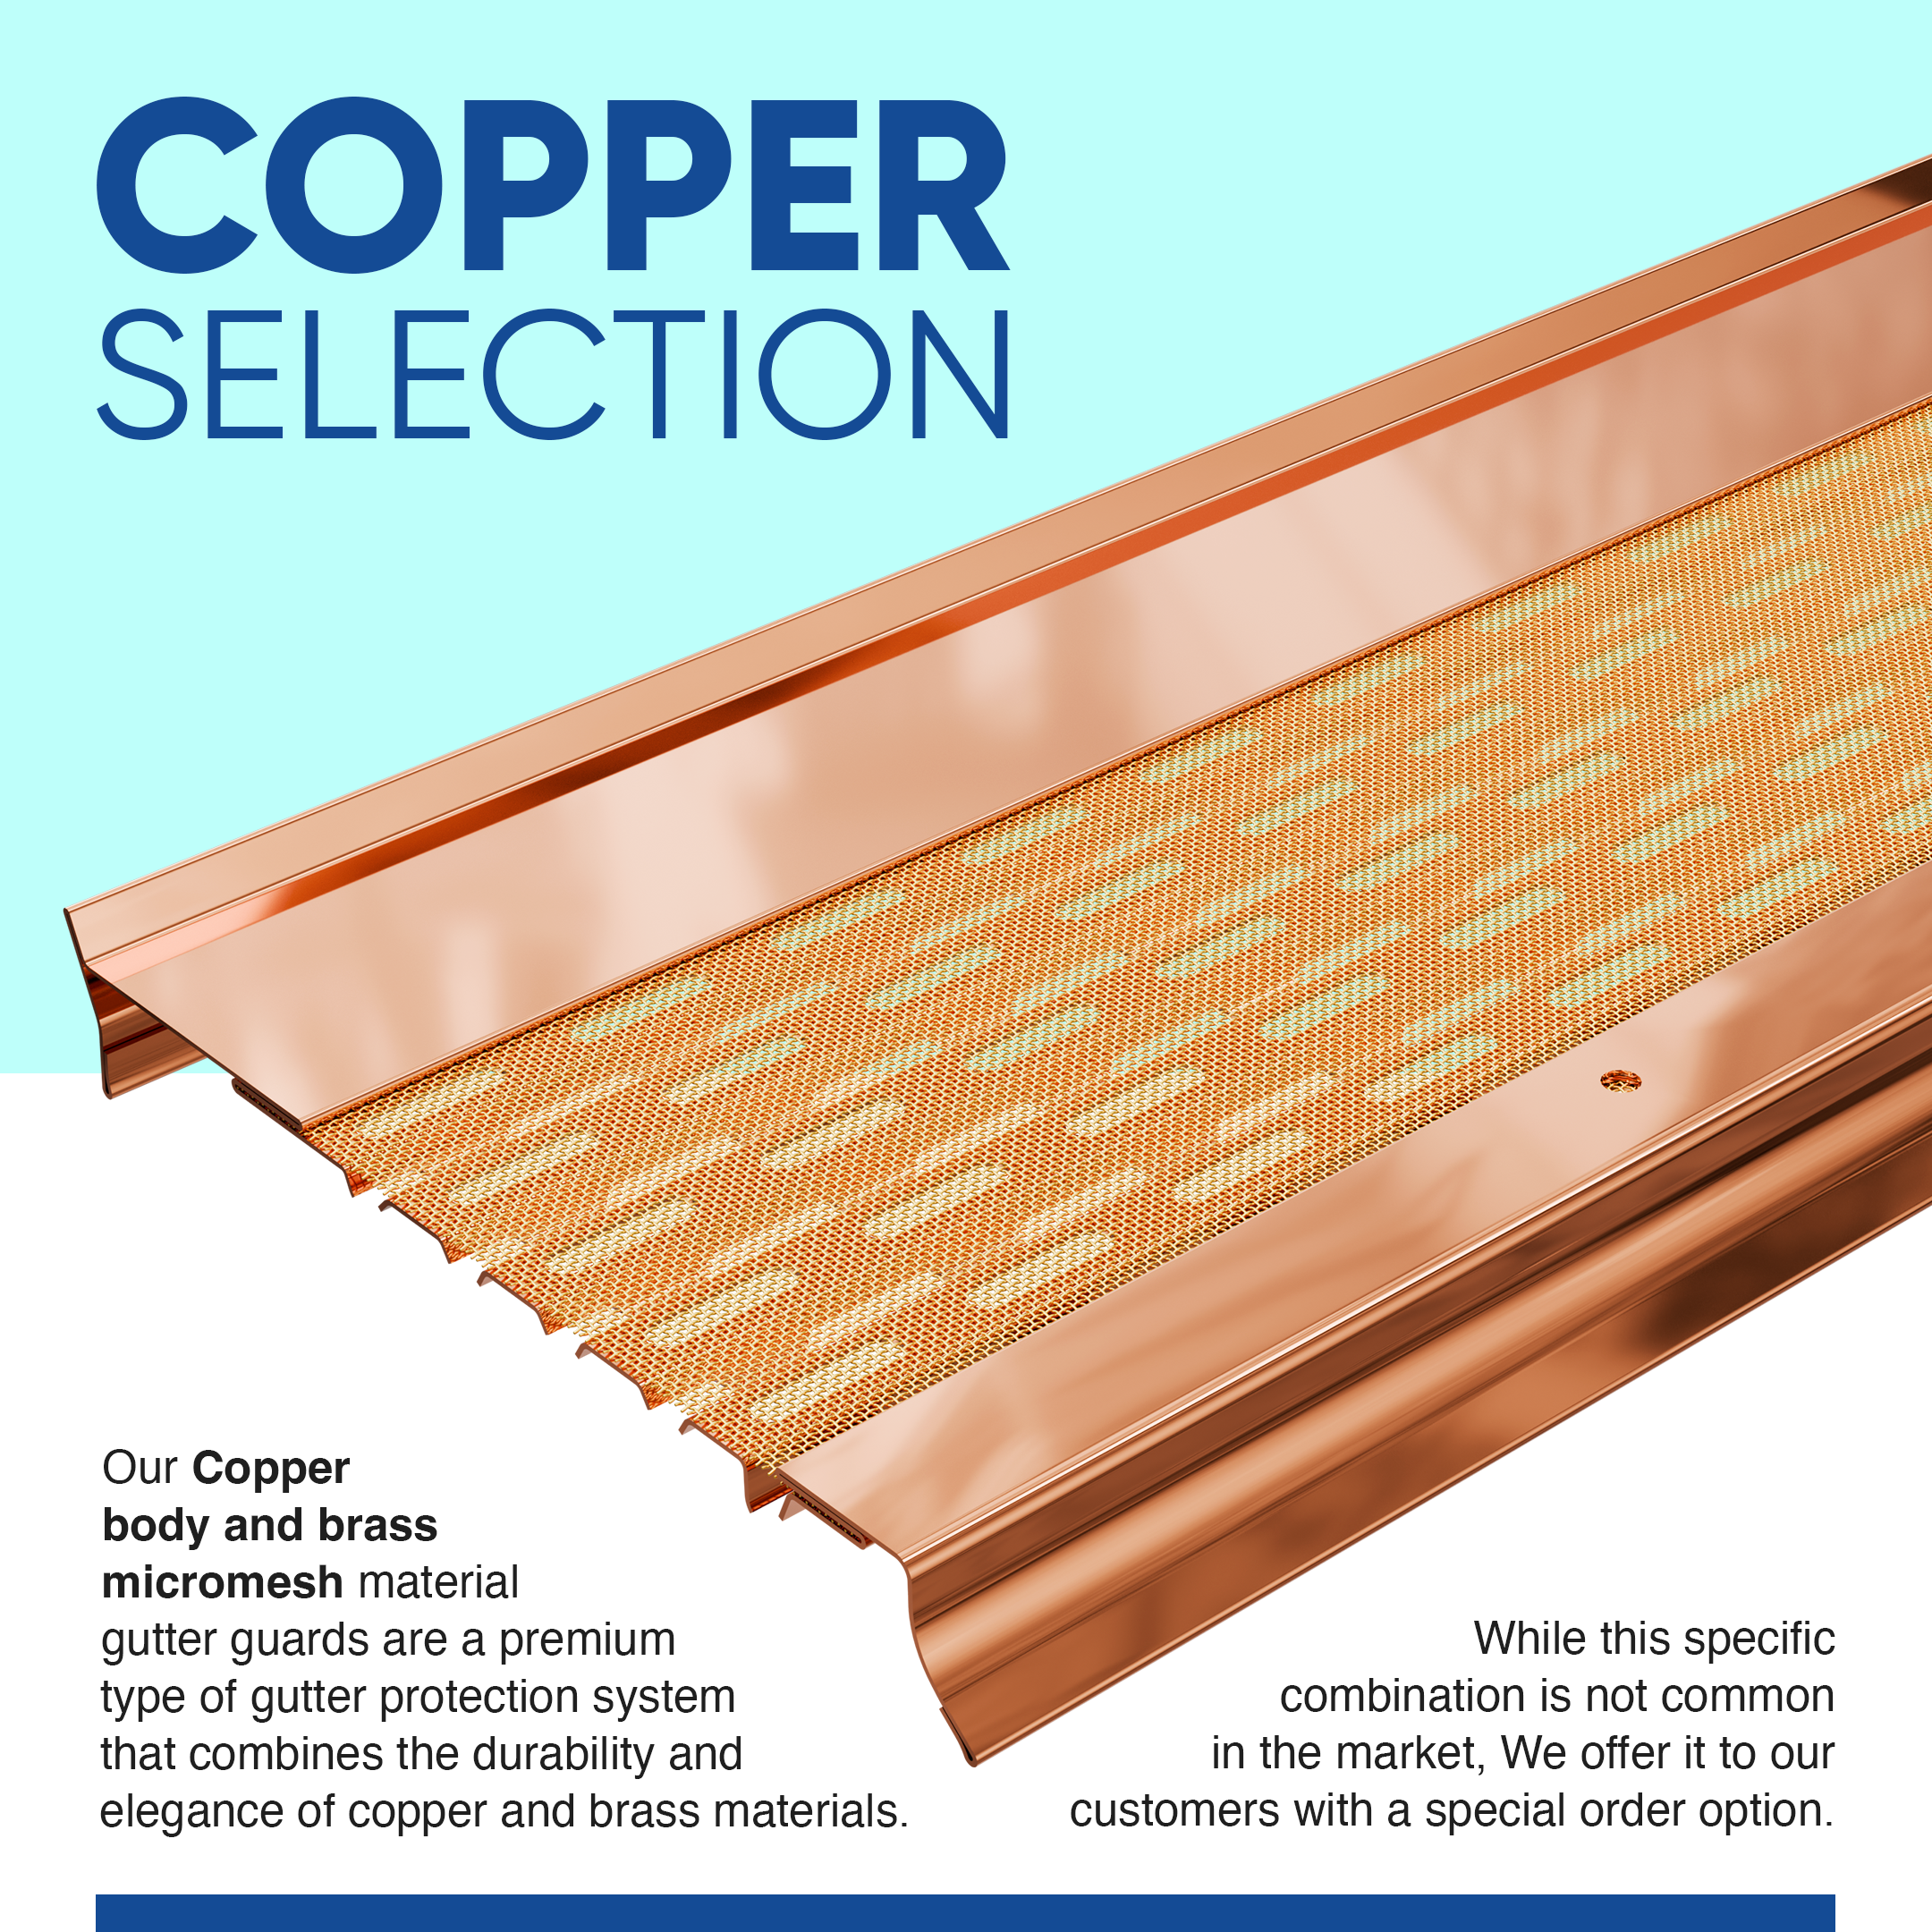 ELITE-6"Micro-Mesh Leaf Guards for Gutters with Brest Micromesh Gutter Guard Leaf Filter – Contractor Grade COPPER (16oz) Gutter Guards from Supply